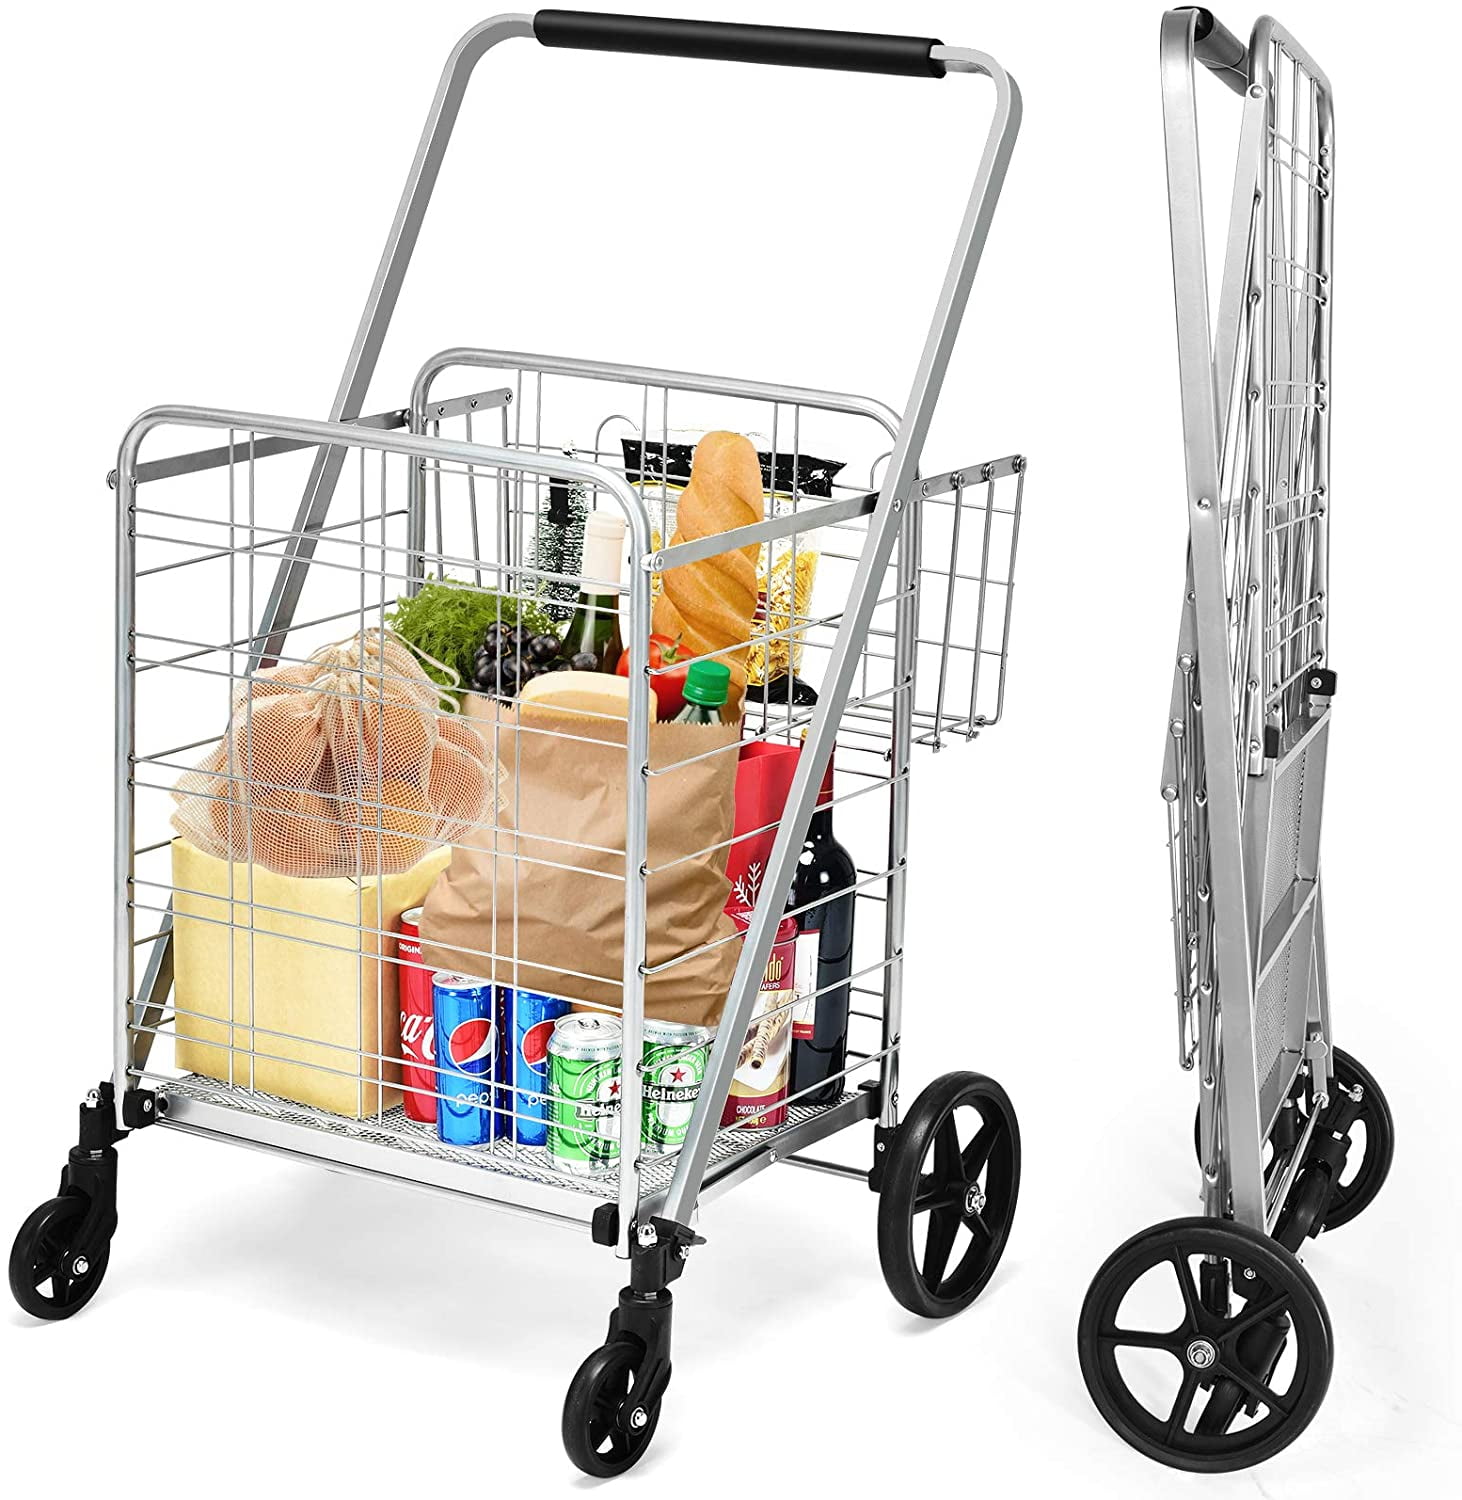 Silver Goplus Folding Shopping Cart Jumbo Double Basket Perfect for Grocery Laundry Book Luggage Travel with Swivel Wheels Utility Cart 